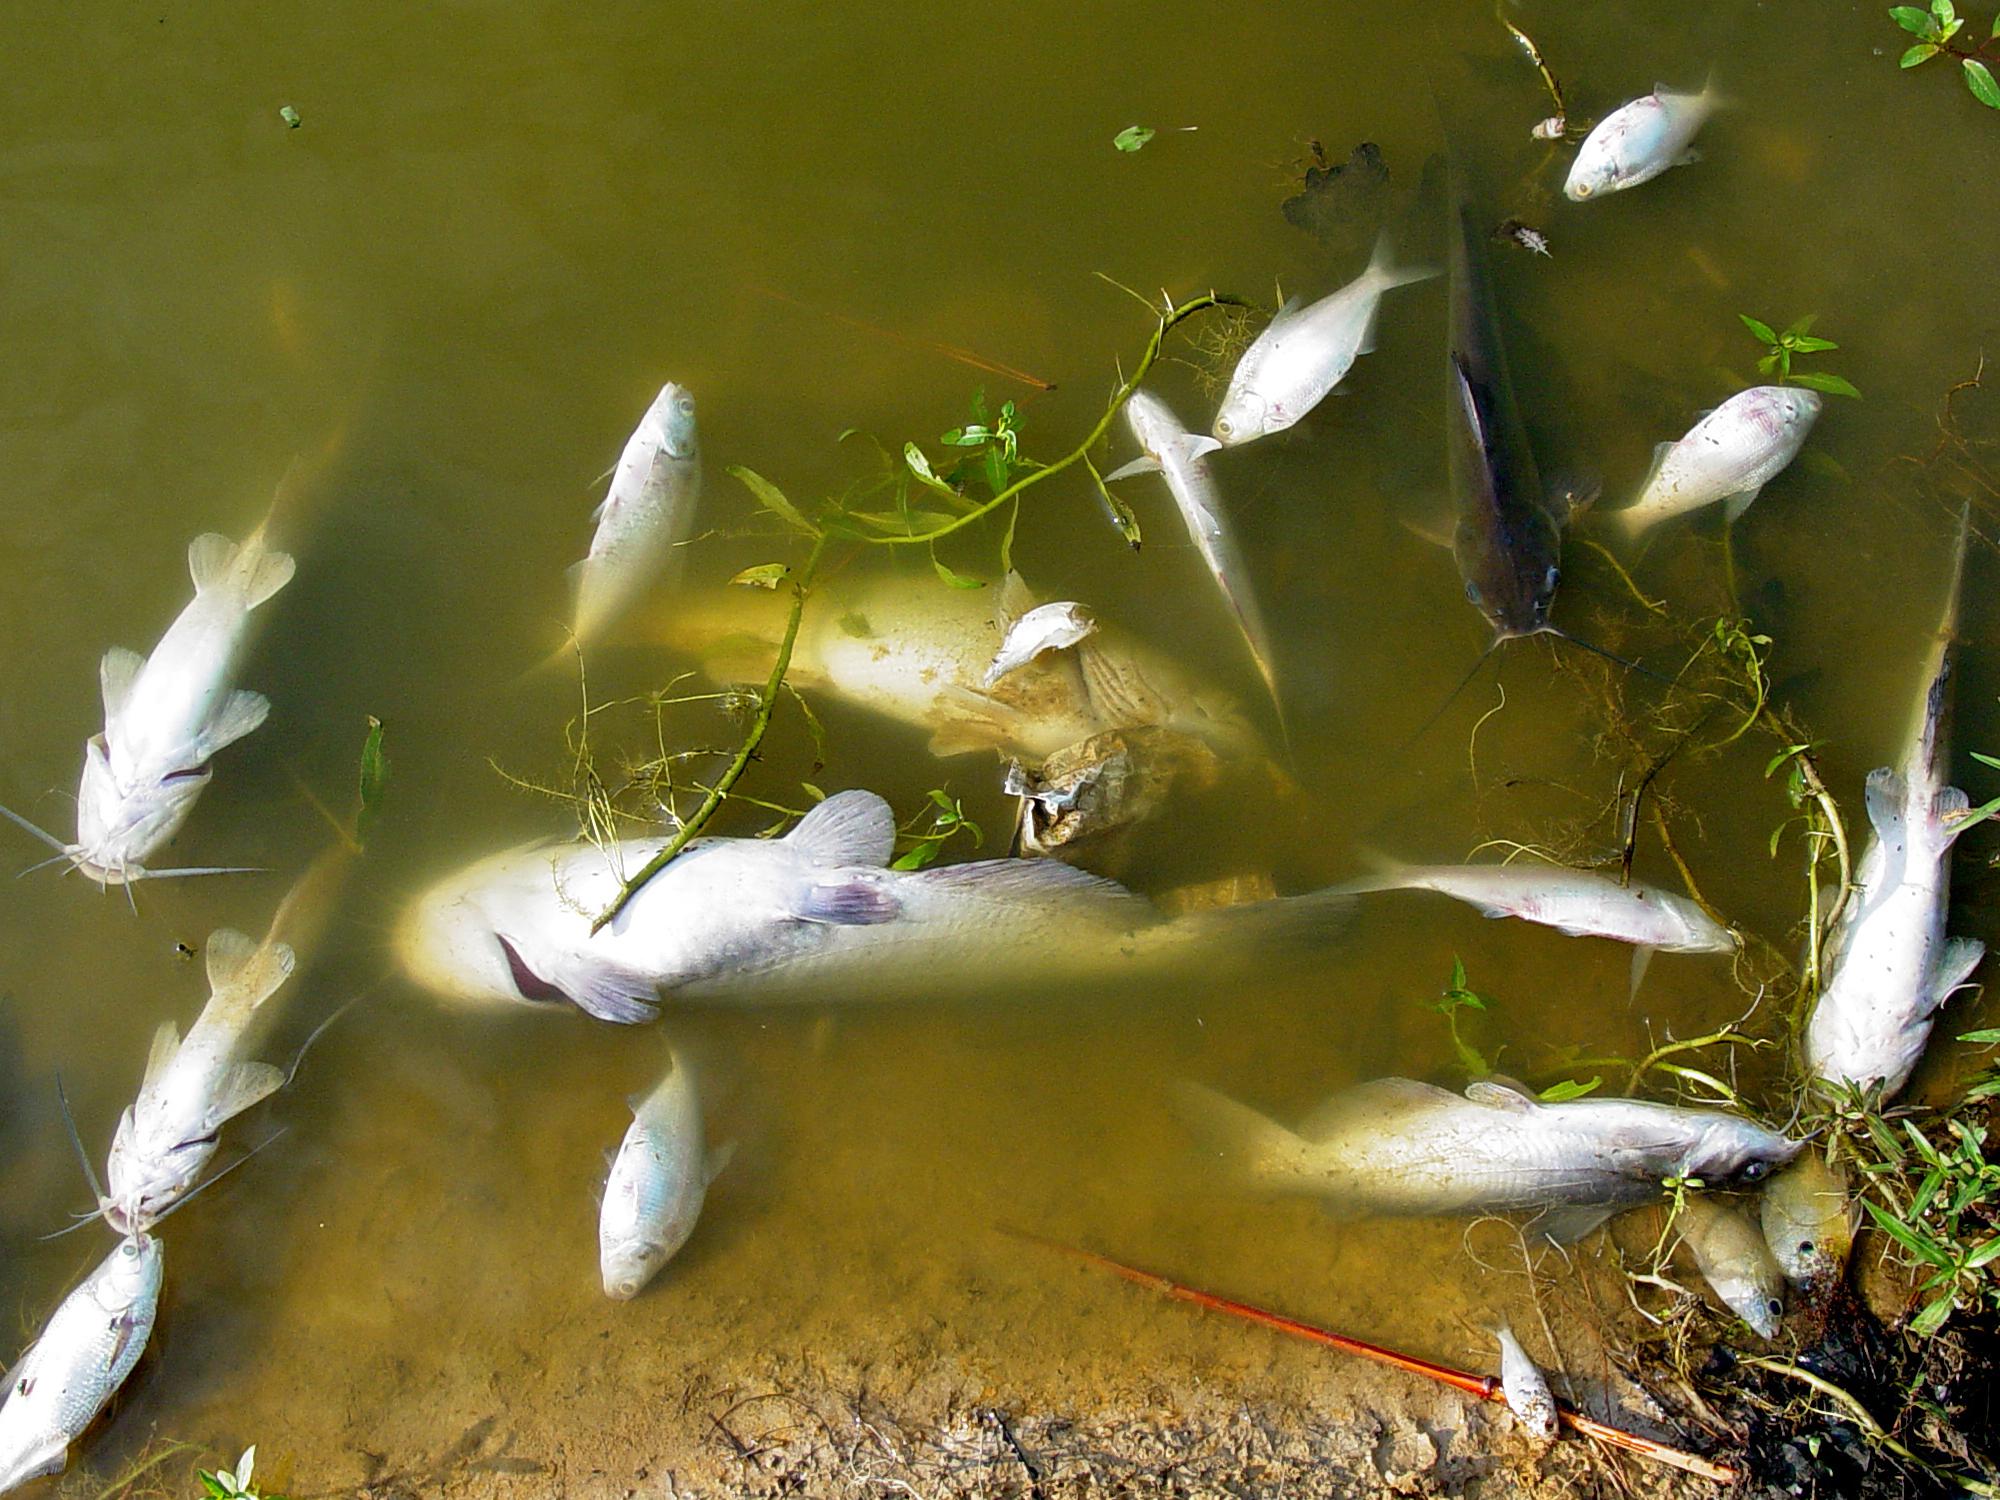 Several dead catfish and other fish species float clustered along  the edge of a pond.